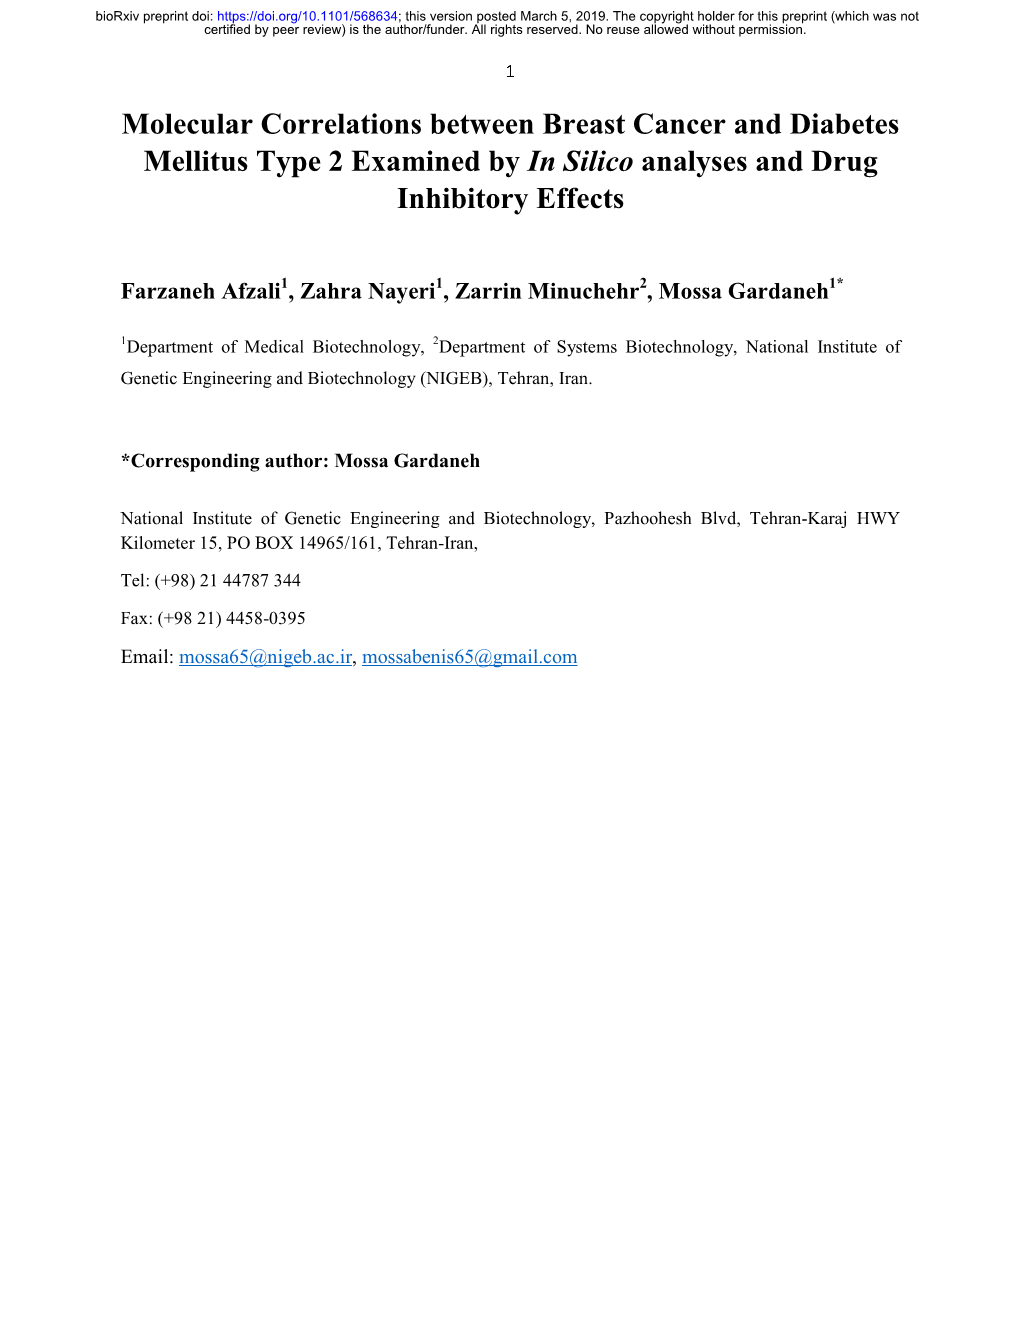 Molecular Correlations Between Breast Cancer and Diabetes Mellitus Type 2 Examined by in Silico Analyses and Drug Inhibitory Effects